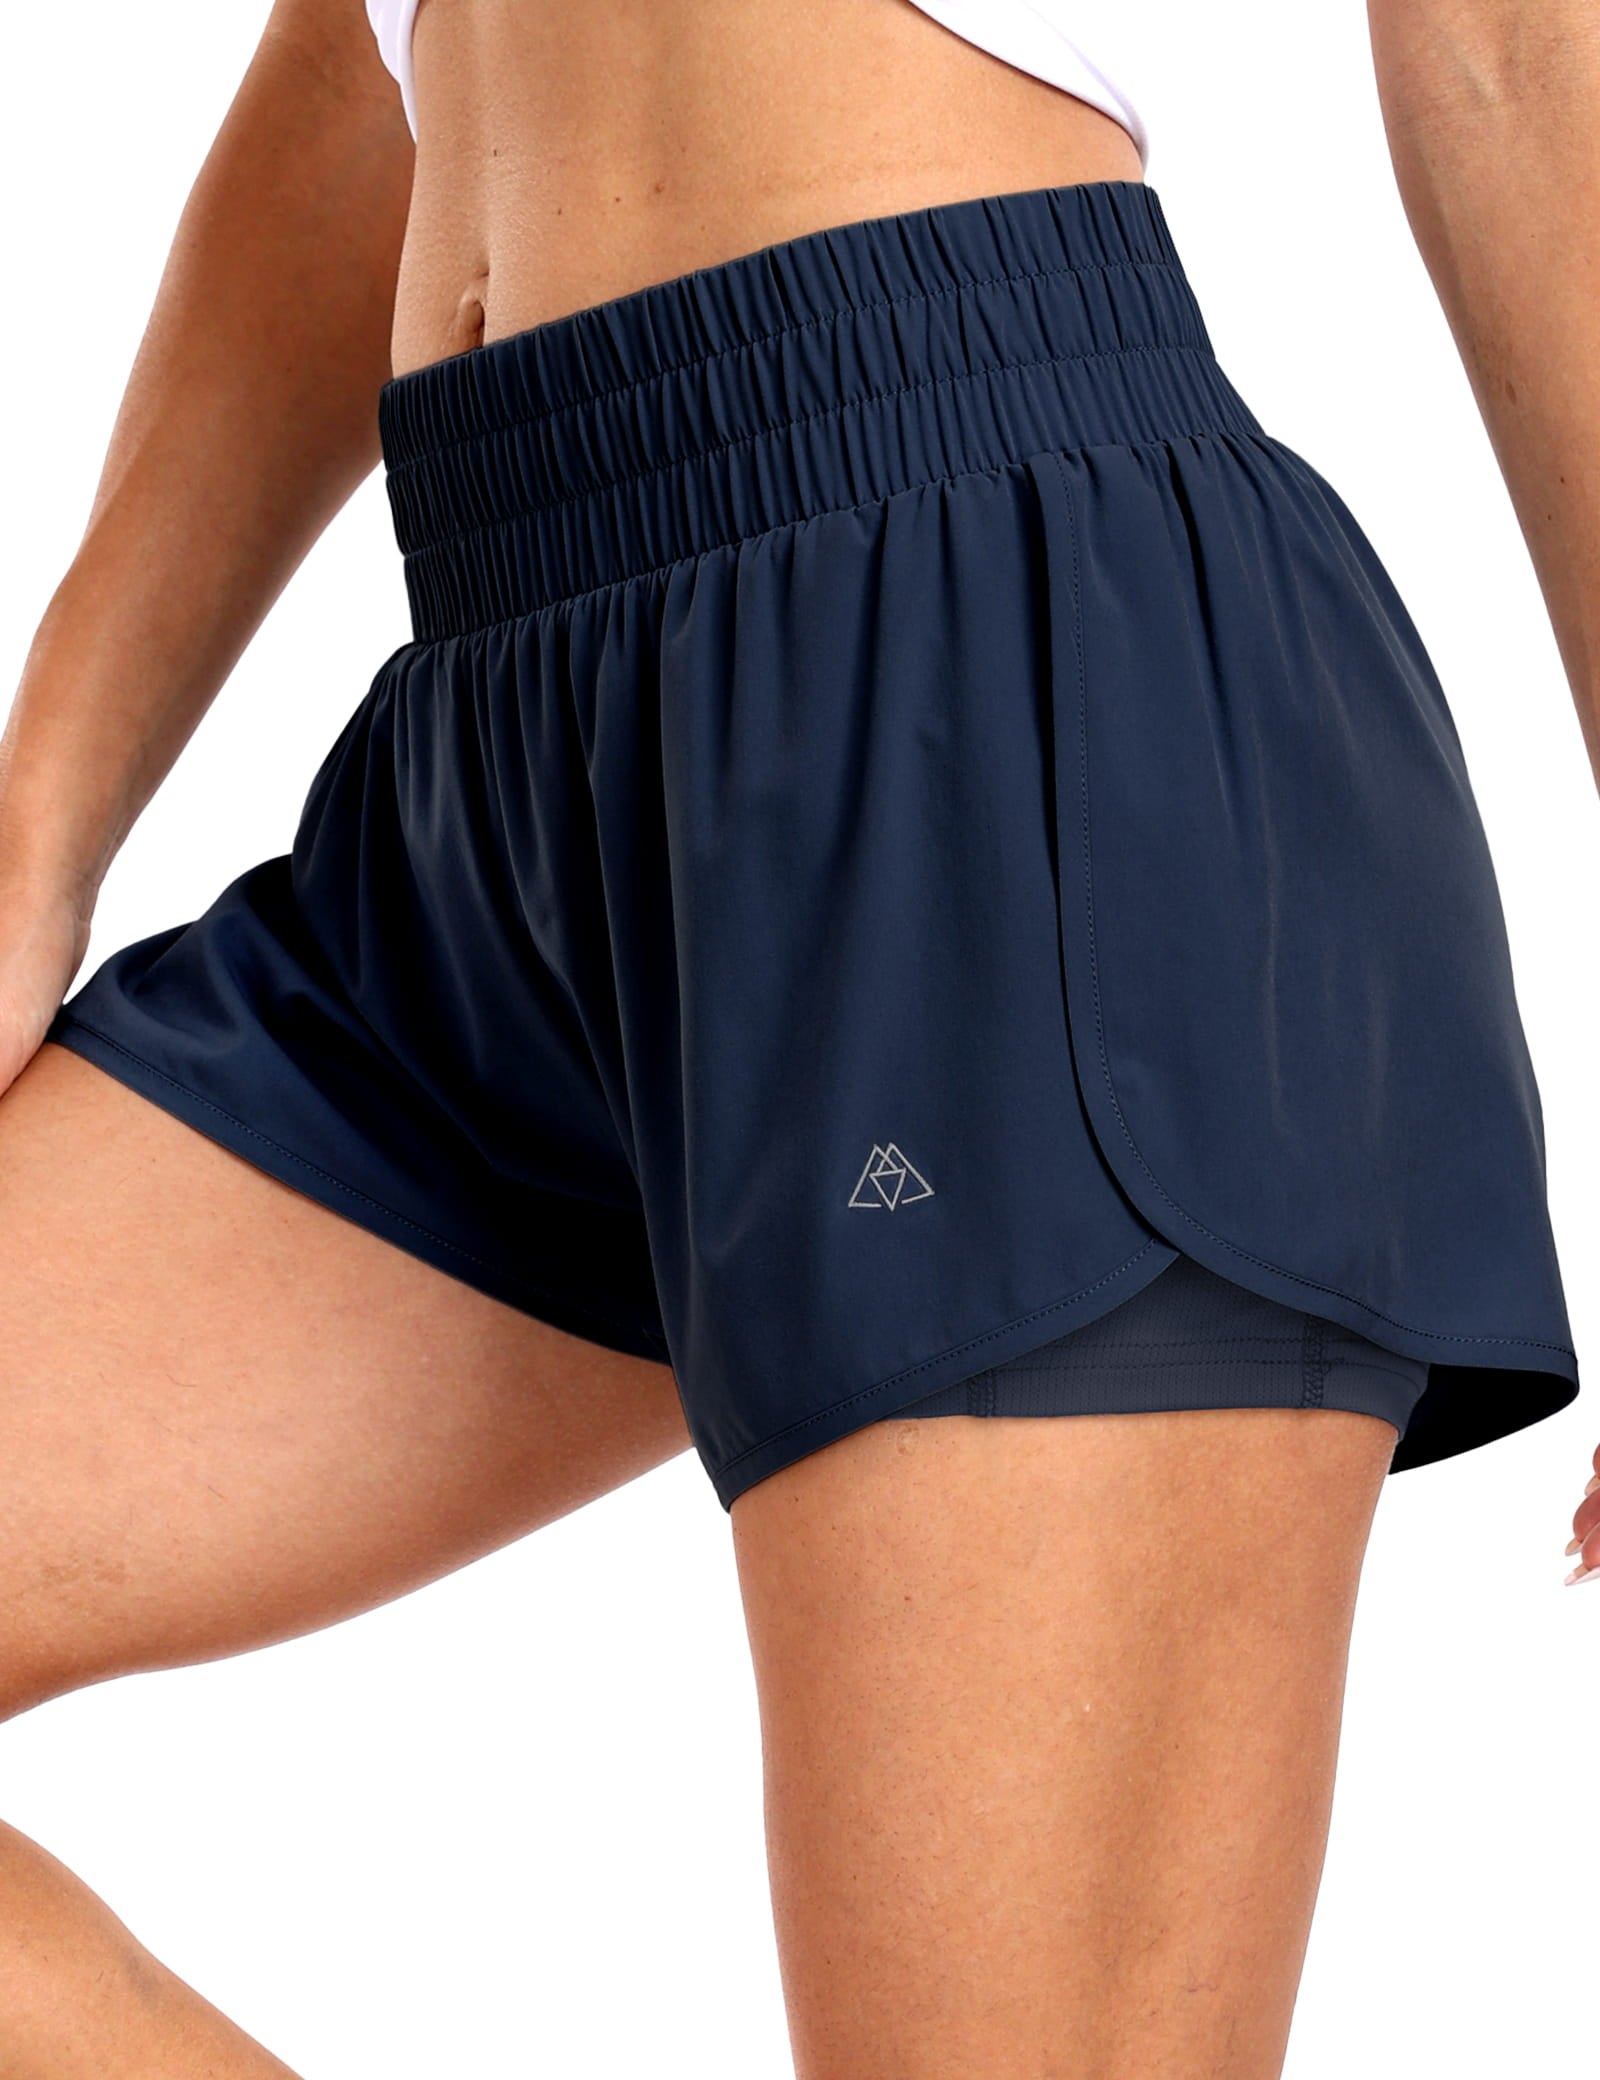 Women's Running Shorts 2 in 1 High Waisted 3 Athletic Shorts